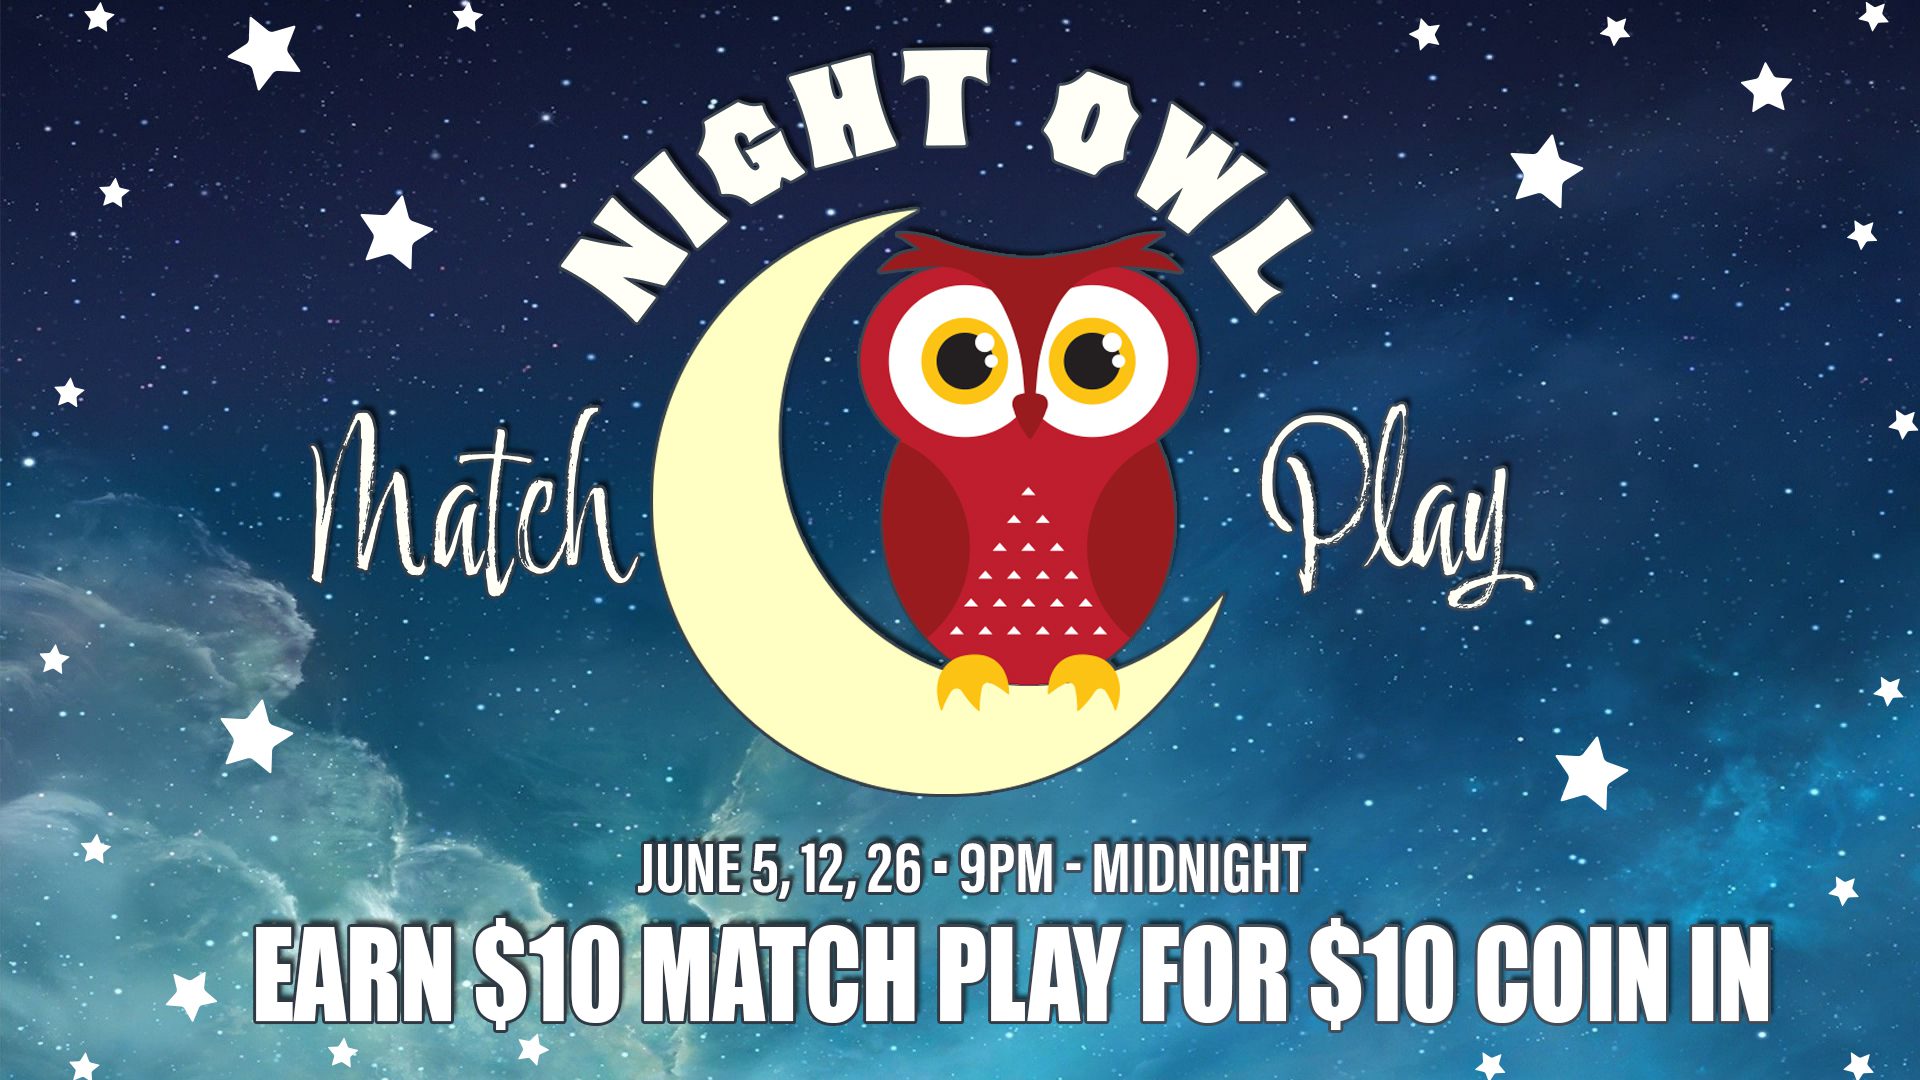 Promotional banner for "night owl match play" event, featuring an owl on a crescent moon against a starry sky background, with event dates and a special offer.